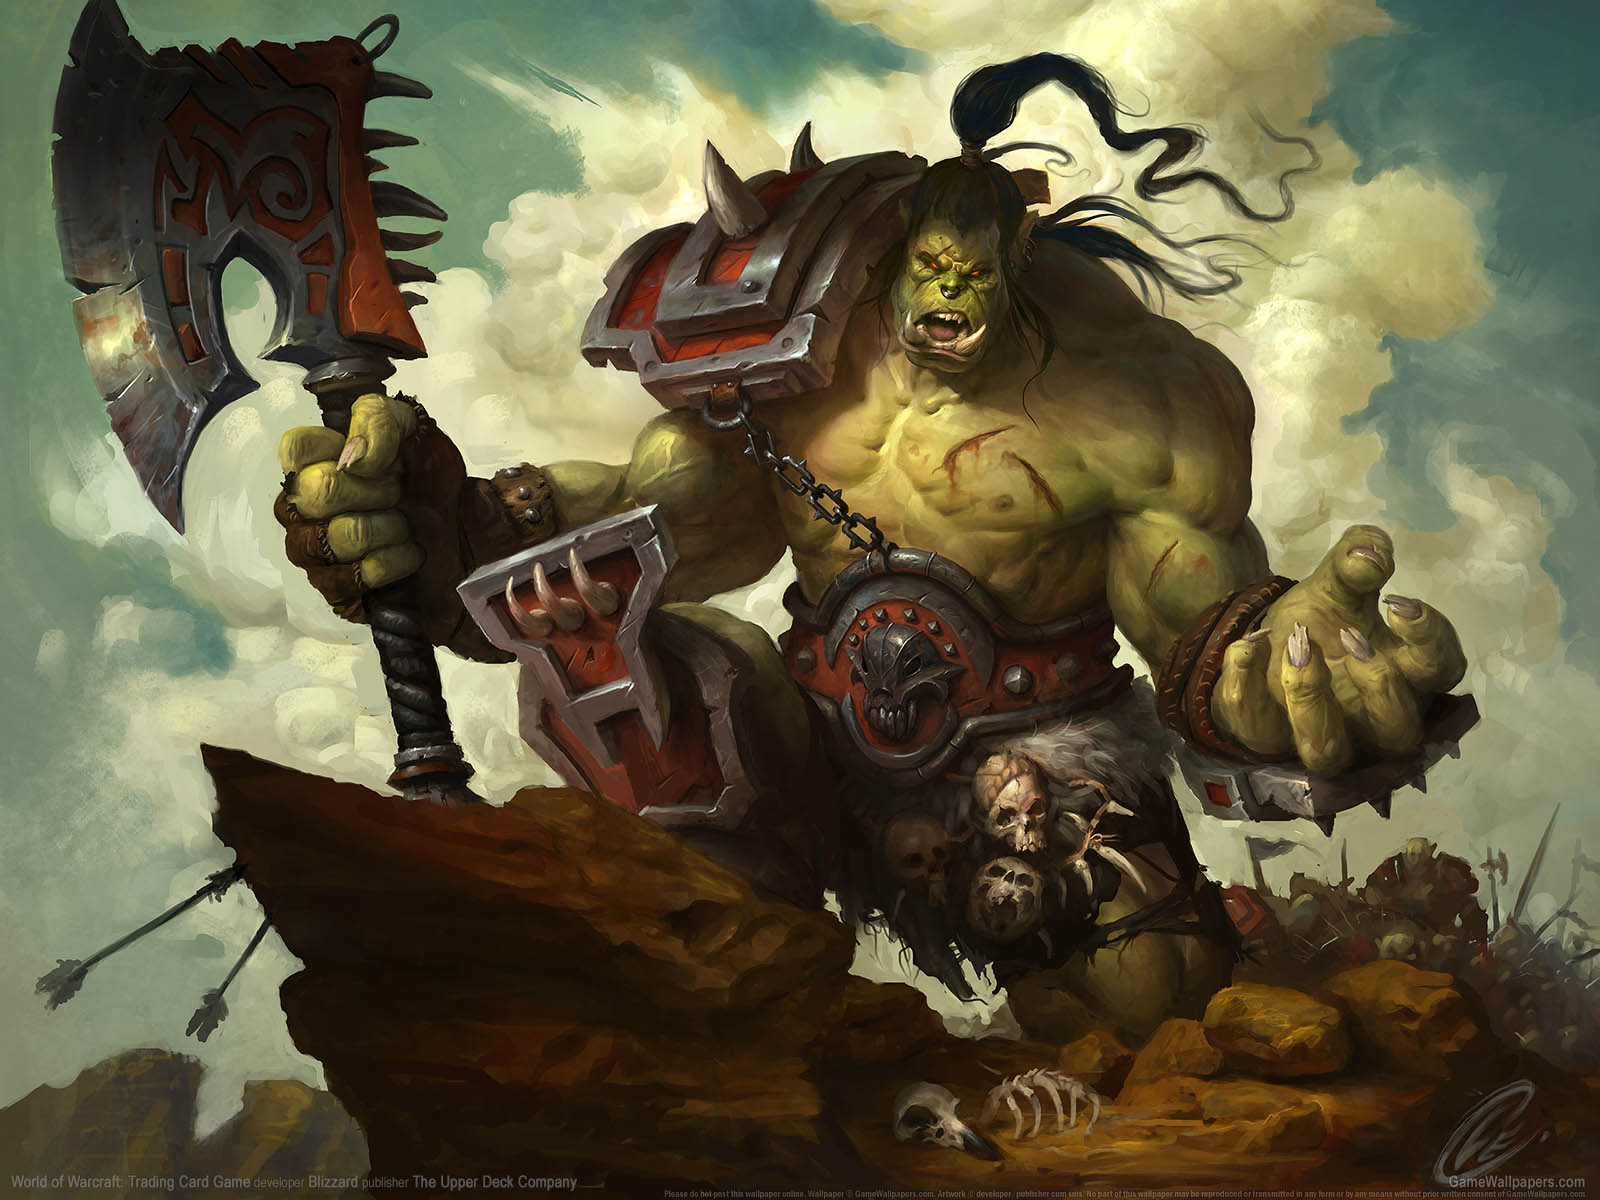 World of Warcraft%3A Trading Card Game achtergrond 60 1600x1200